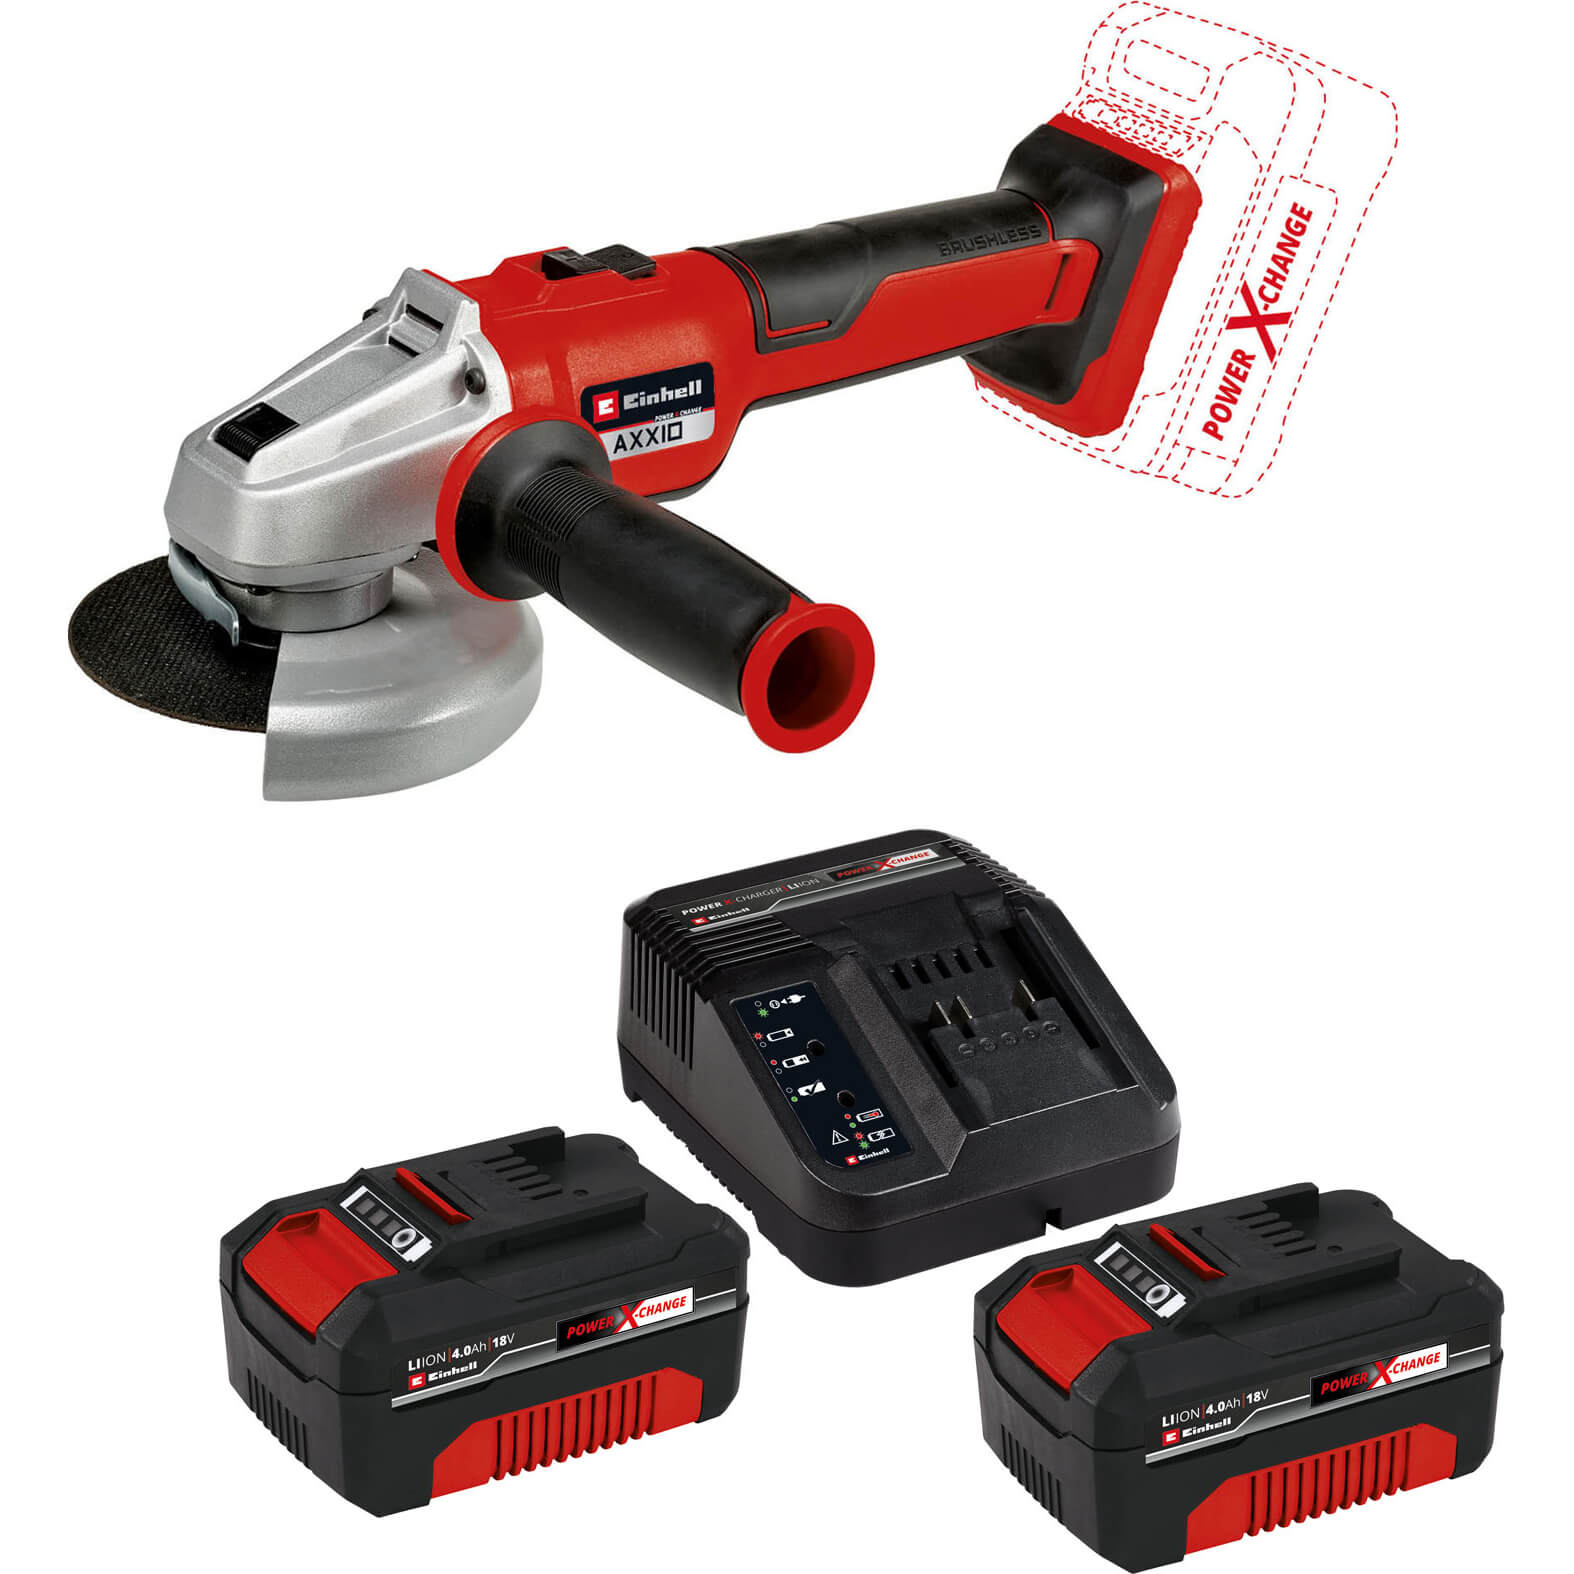 Image of Einhell AXXIO 18/125 Q 18v Quick Release Brushless Angle Grinder 125mm 2 x 4ah Li-ion Charger No Case